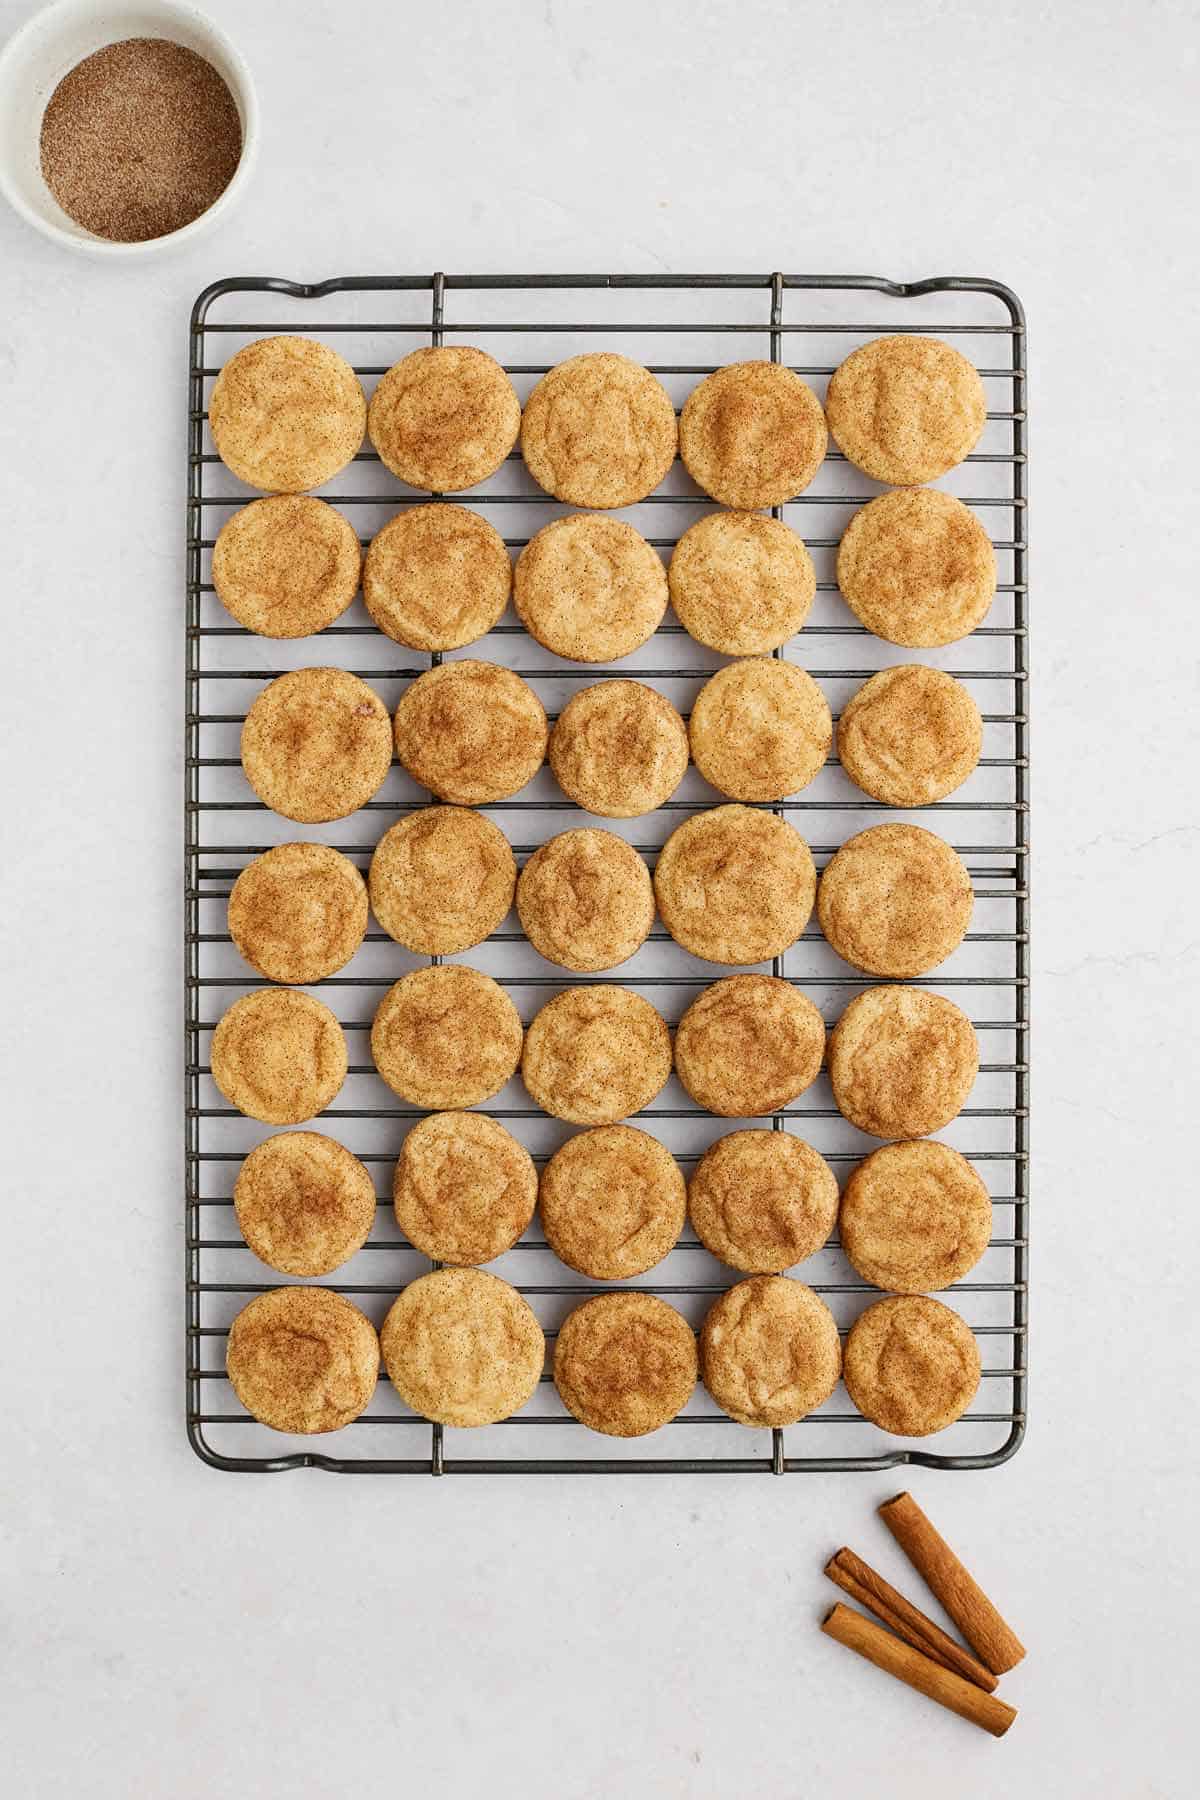 Baked snickerdoodle cookies on a cooling rack.